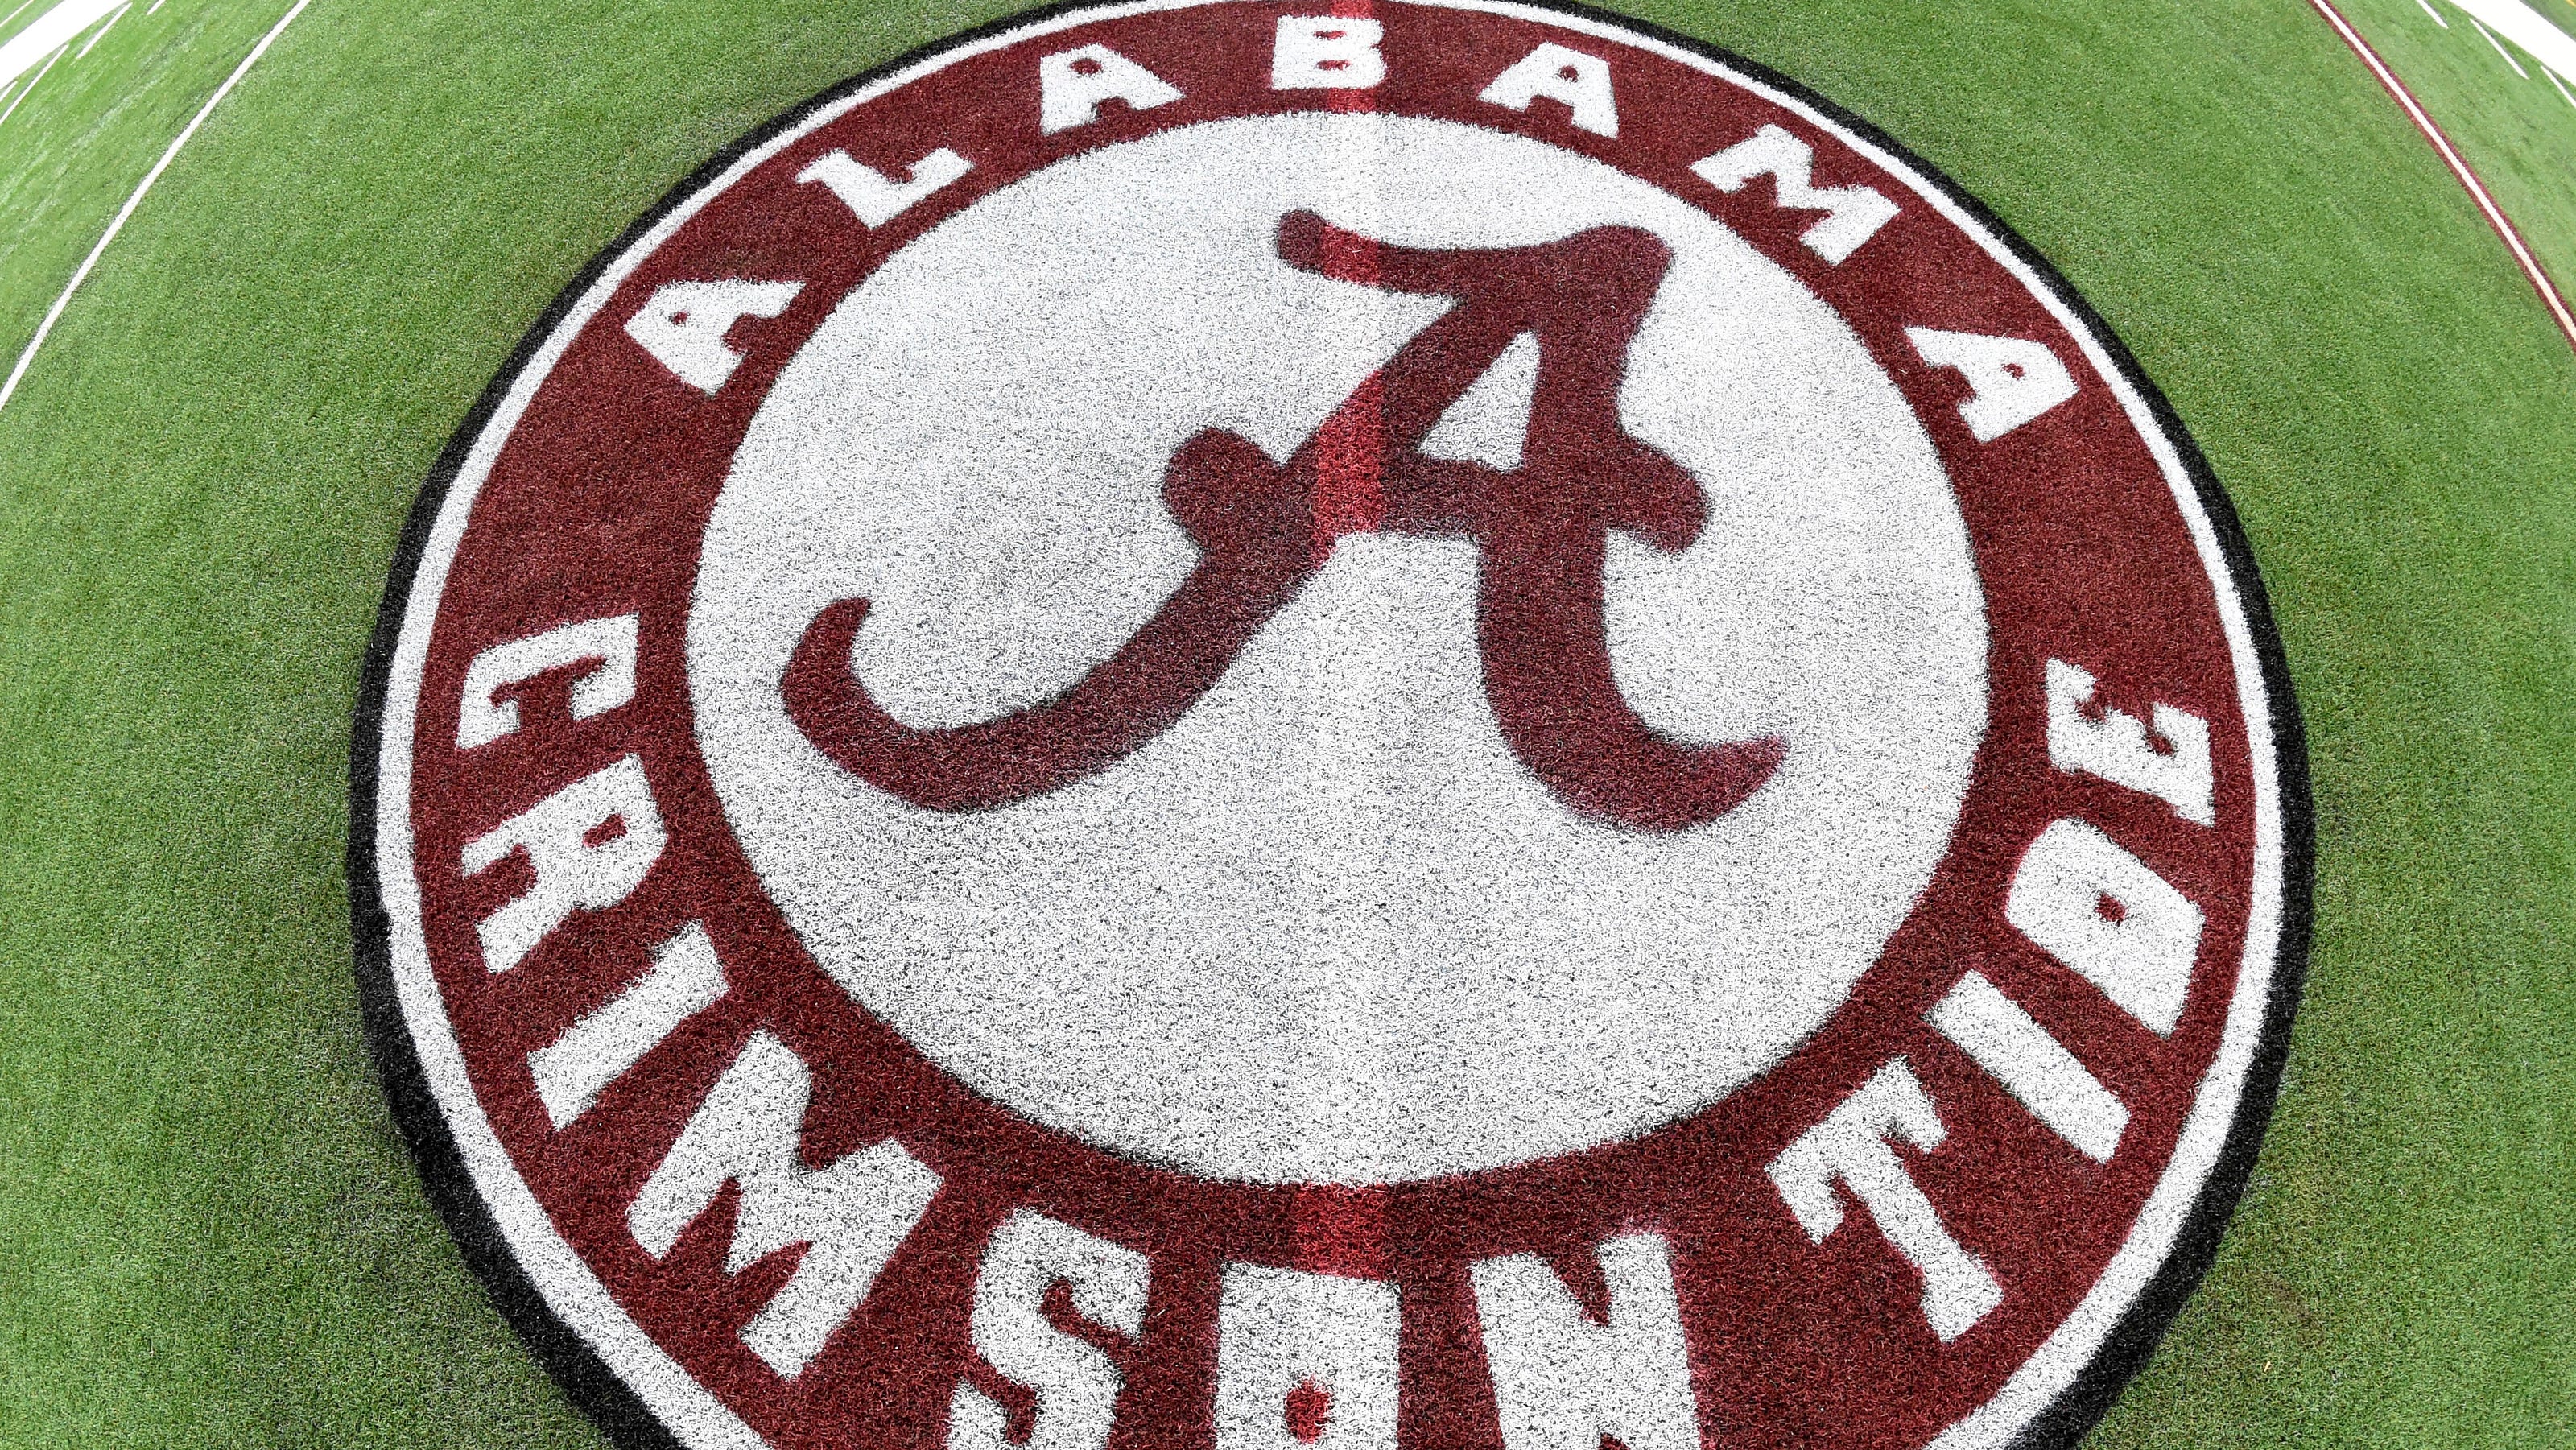 Alabama's football coaching staff gets raises, but how much?